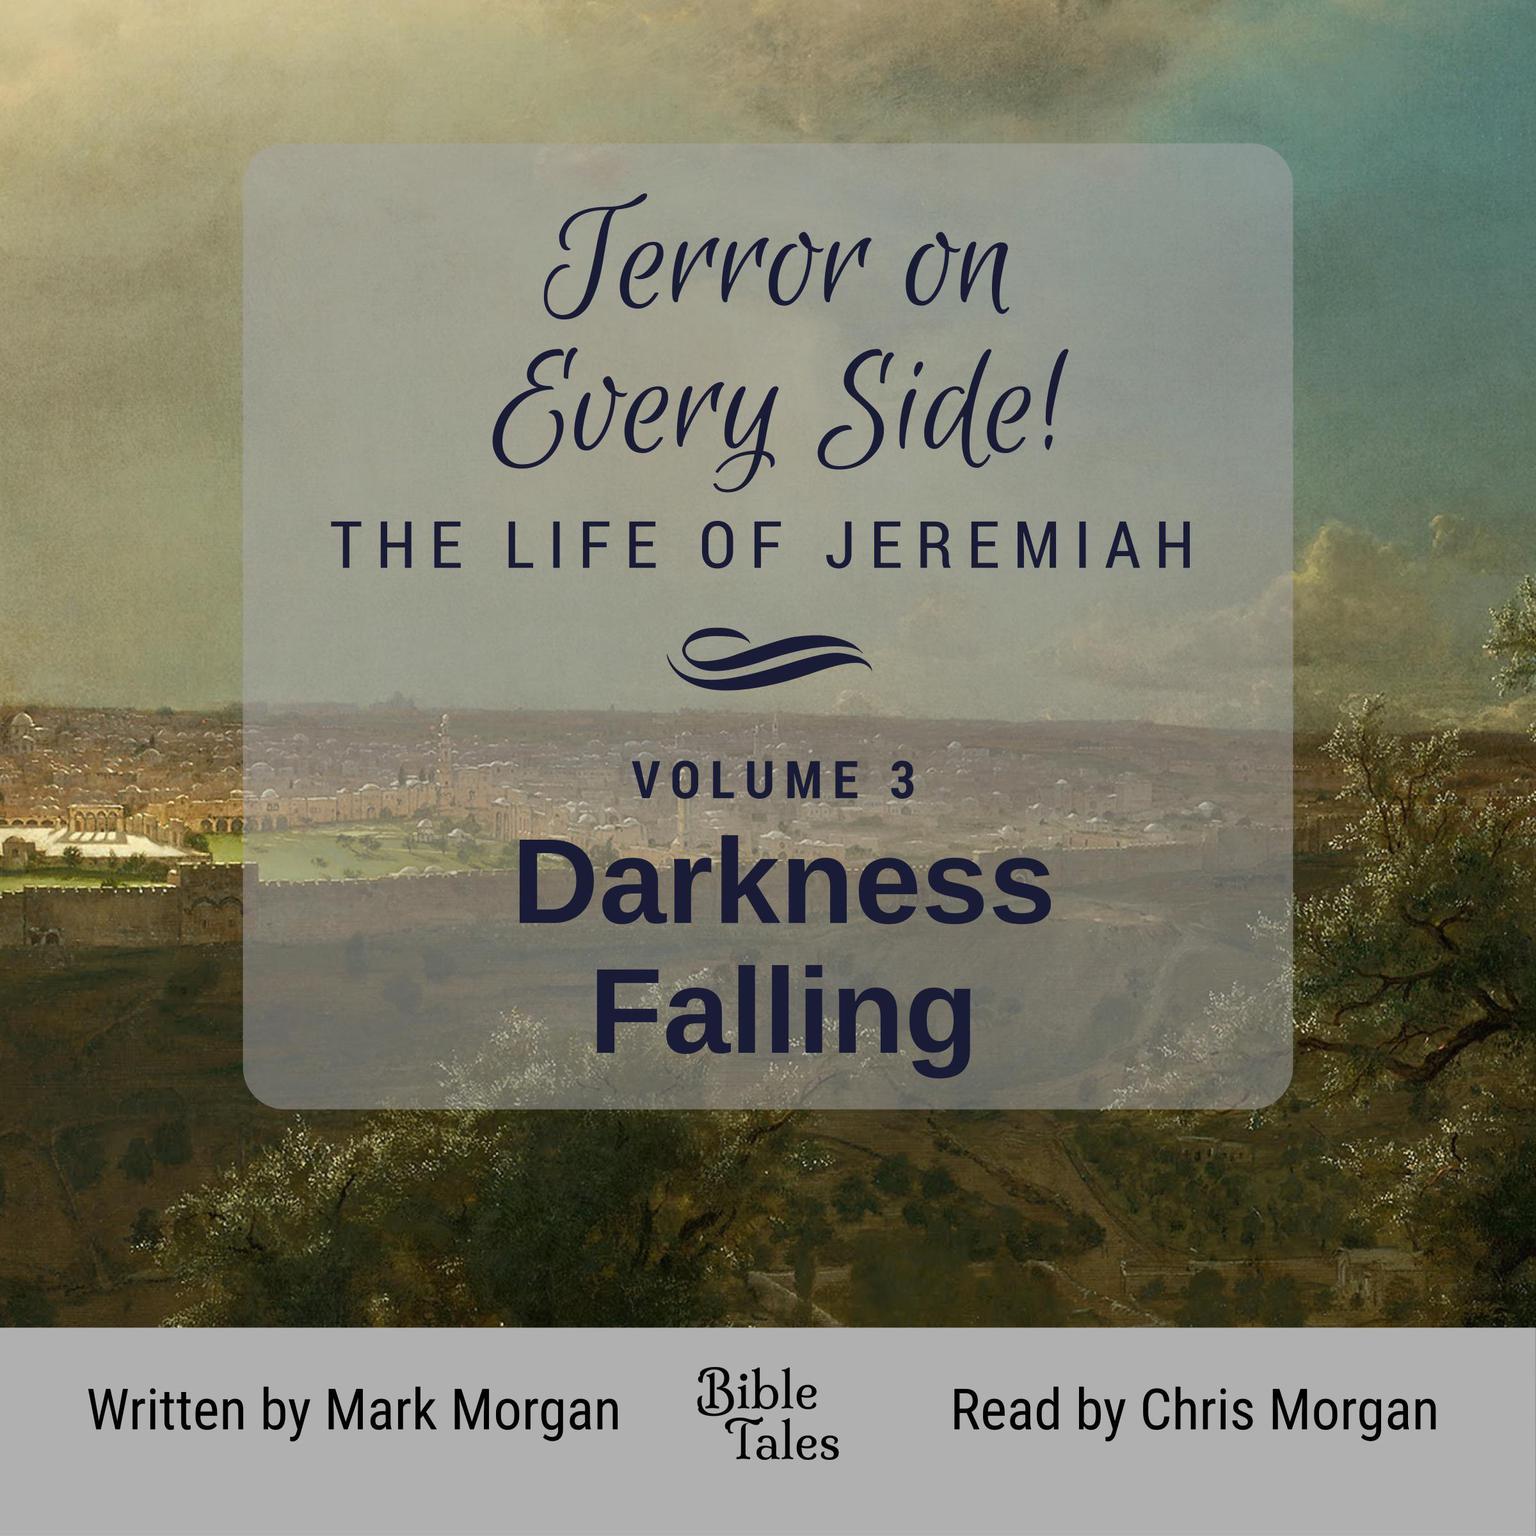 Terror on Every Side! The Life of Jeremiah Volume 3 – Darkness Falling: The Life of Jeremiah  Audiobook, by Mark Morgan